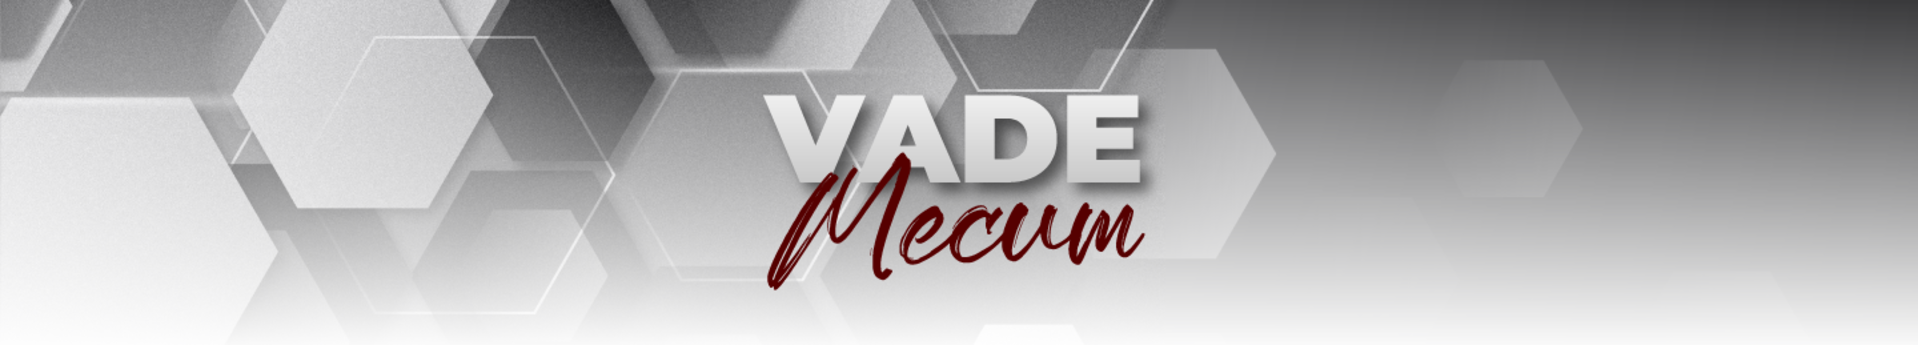 banner-vade-mecum-resized.png - 370,29 kB